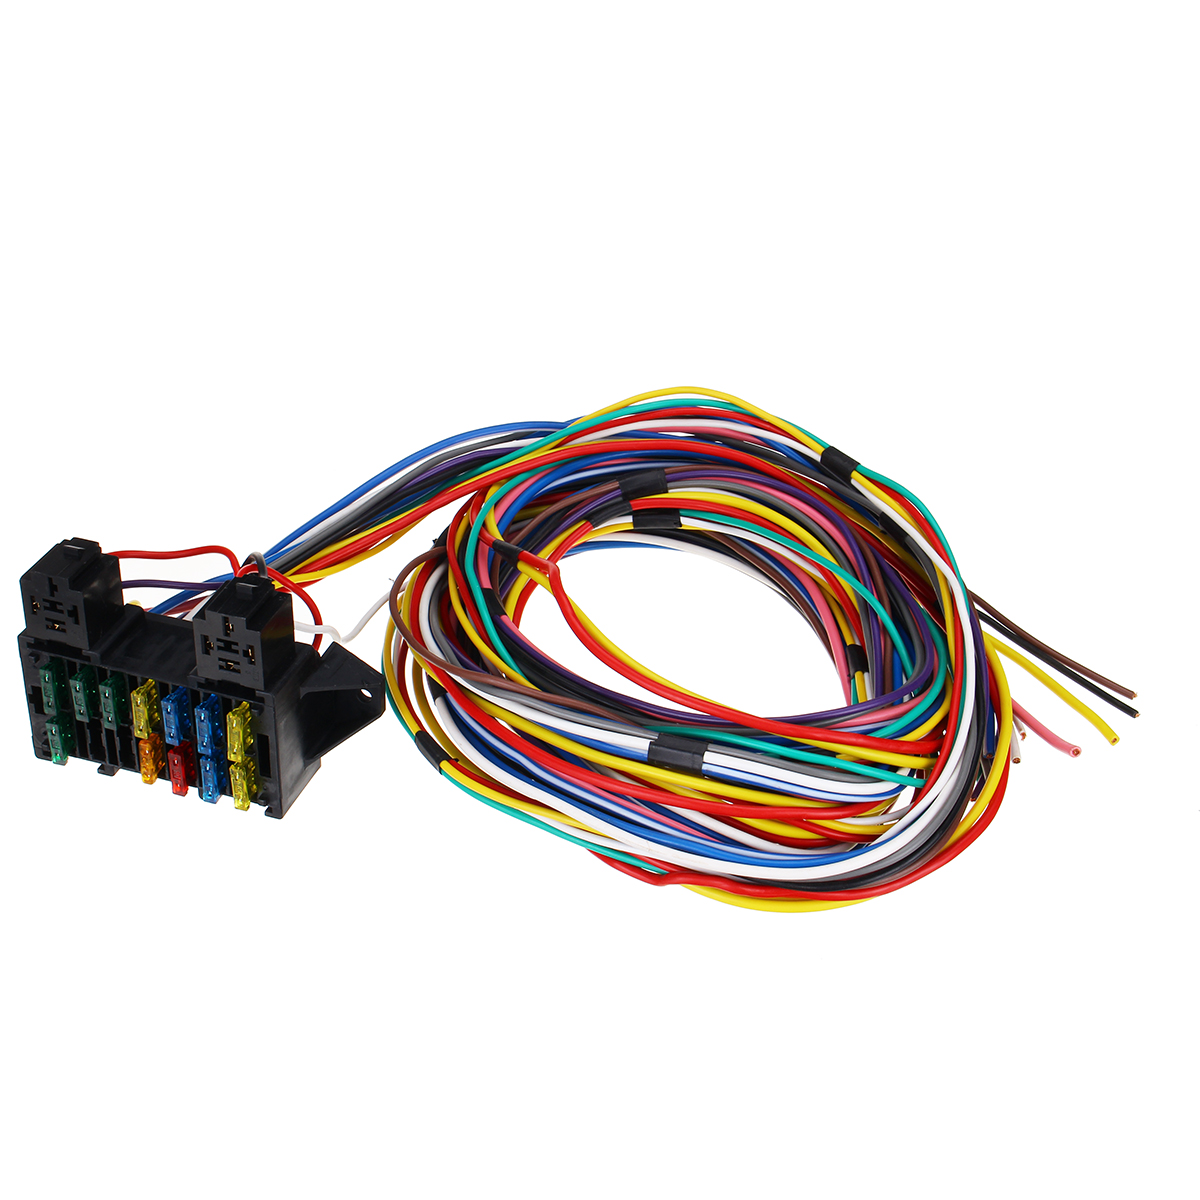 Find 14 Circuit Universal Wiring Harness Bumper Wire Kit 12V Durability Car Hot Rod Street Rod XL Wires for Sale on Gipsybee.com with cryptocurrencies